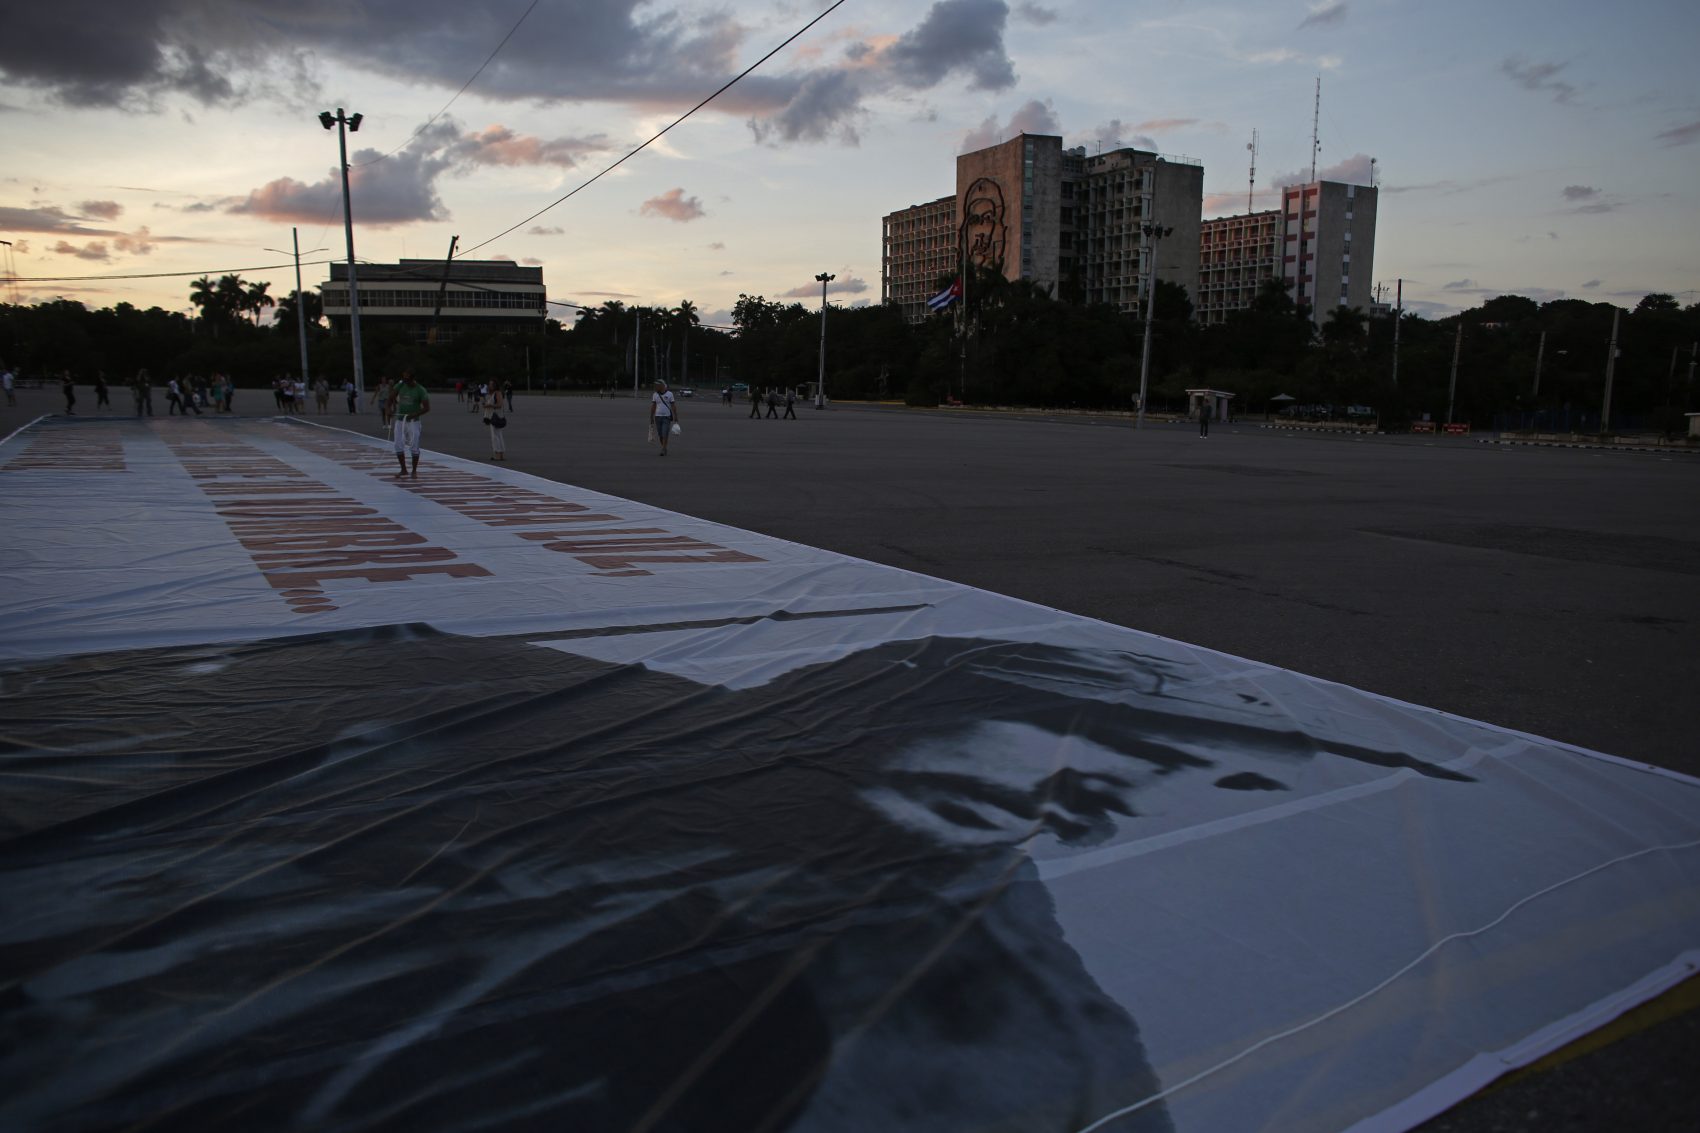 A giant banner with a photograph of the late Cuban leader Fidel Castro lies on the ground waiting to be hung at the Revolution Square in Havana, Cuba on Sunday. (Dario Lopez-Mills/AP)